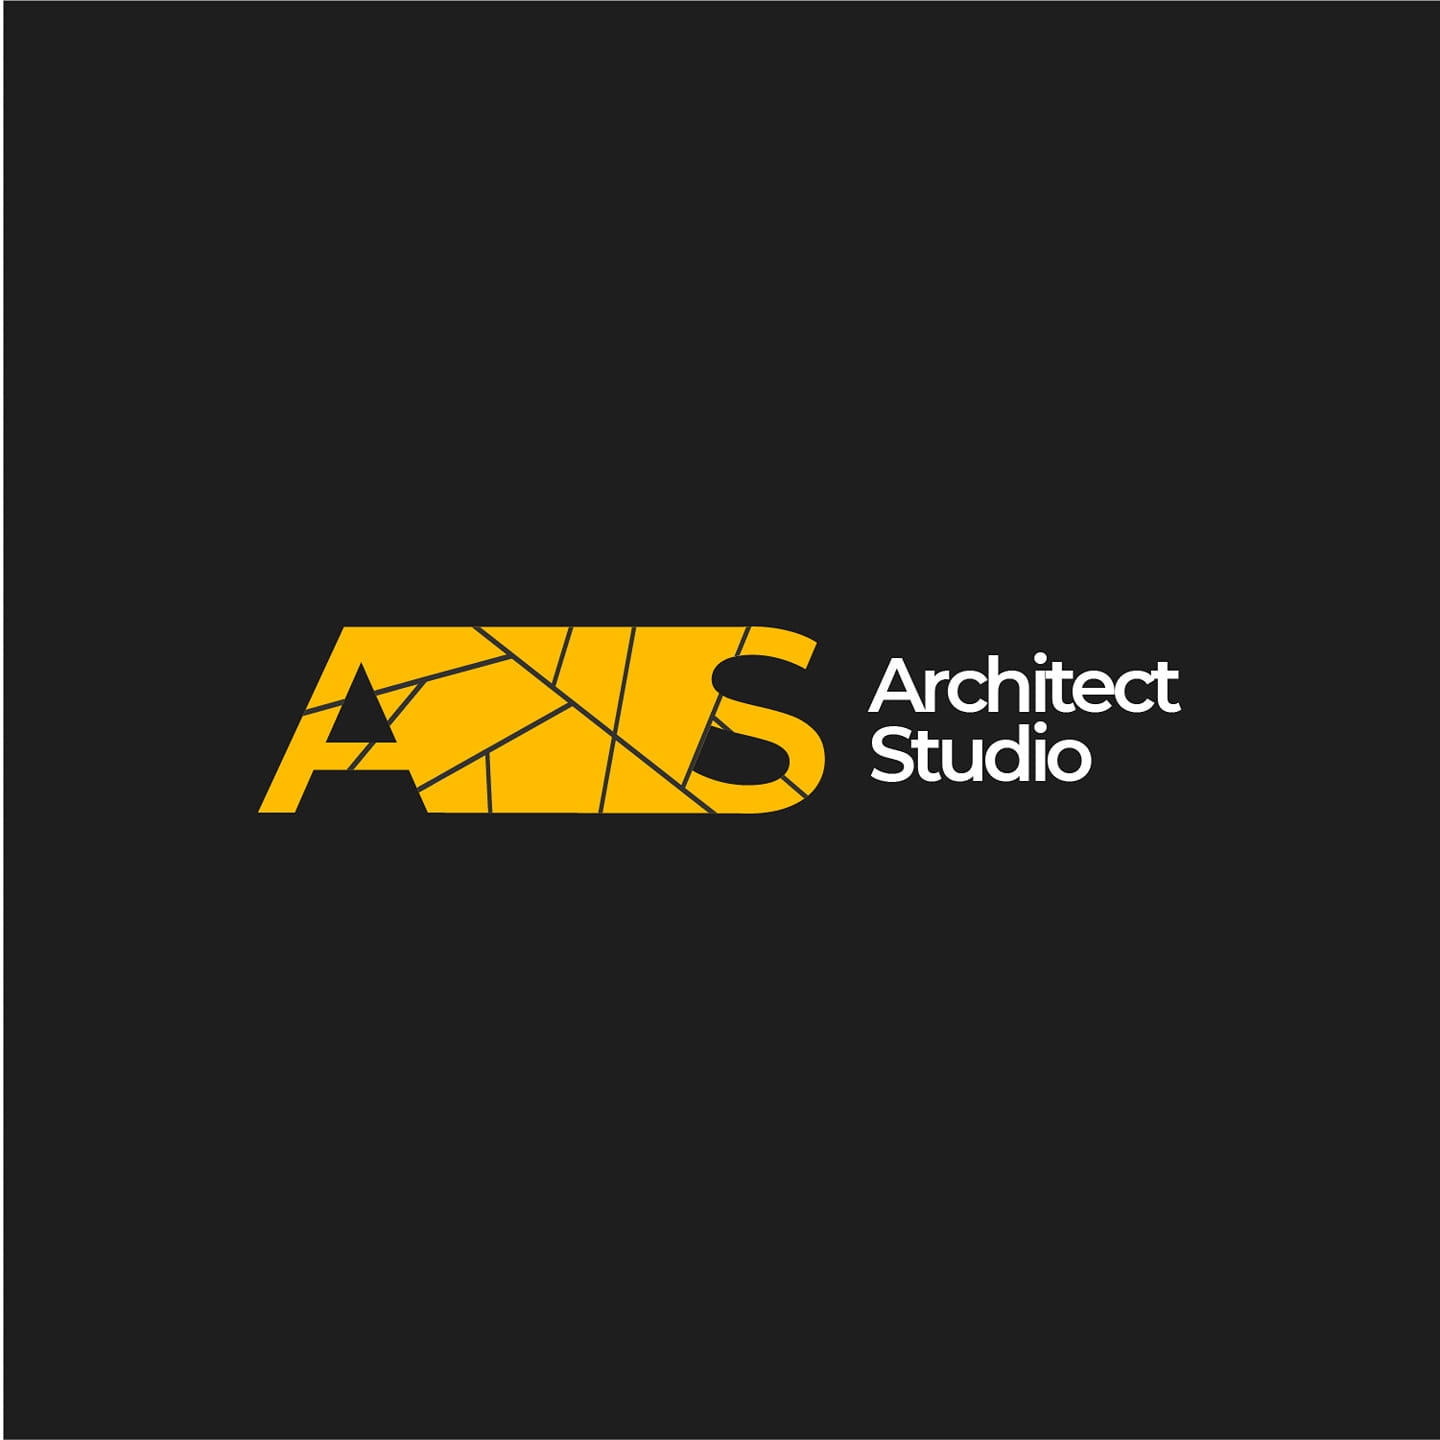 Architect Studio|Accounting Services|Professional Services